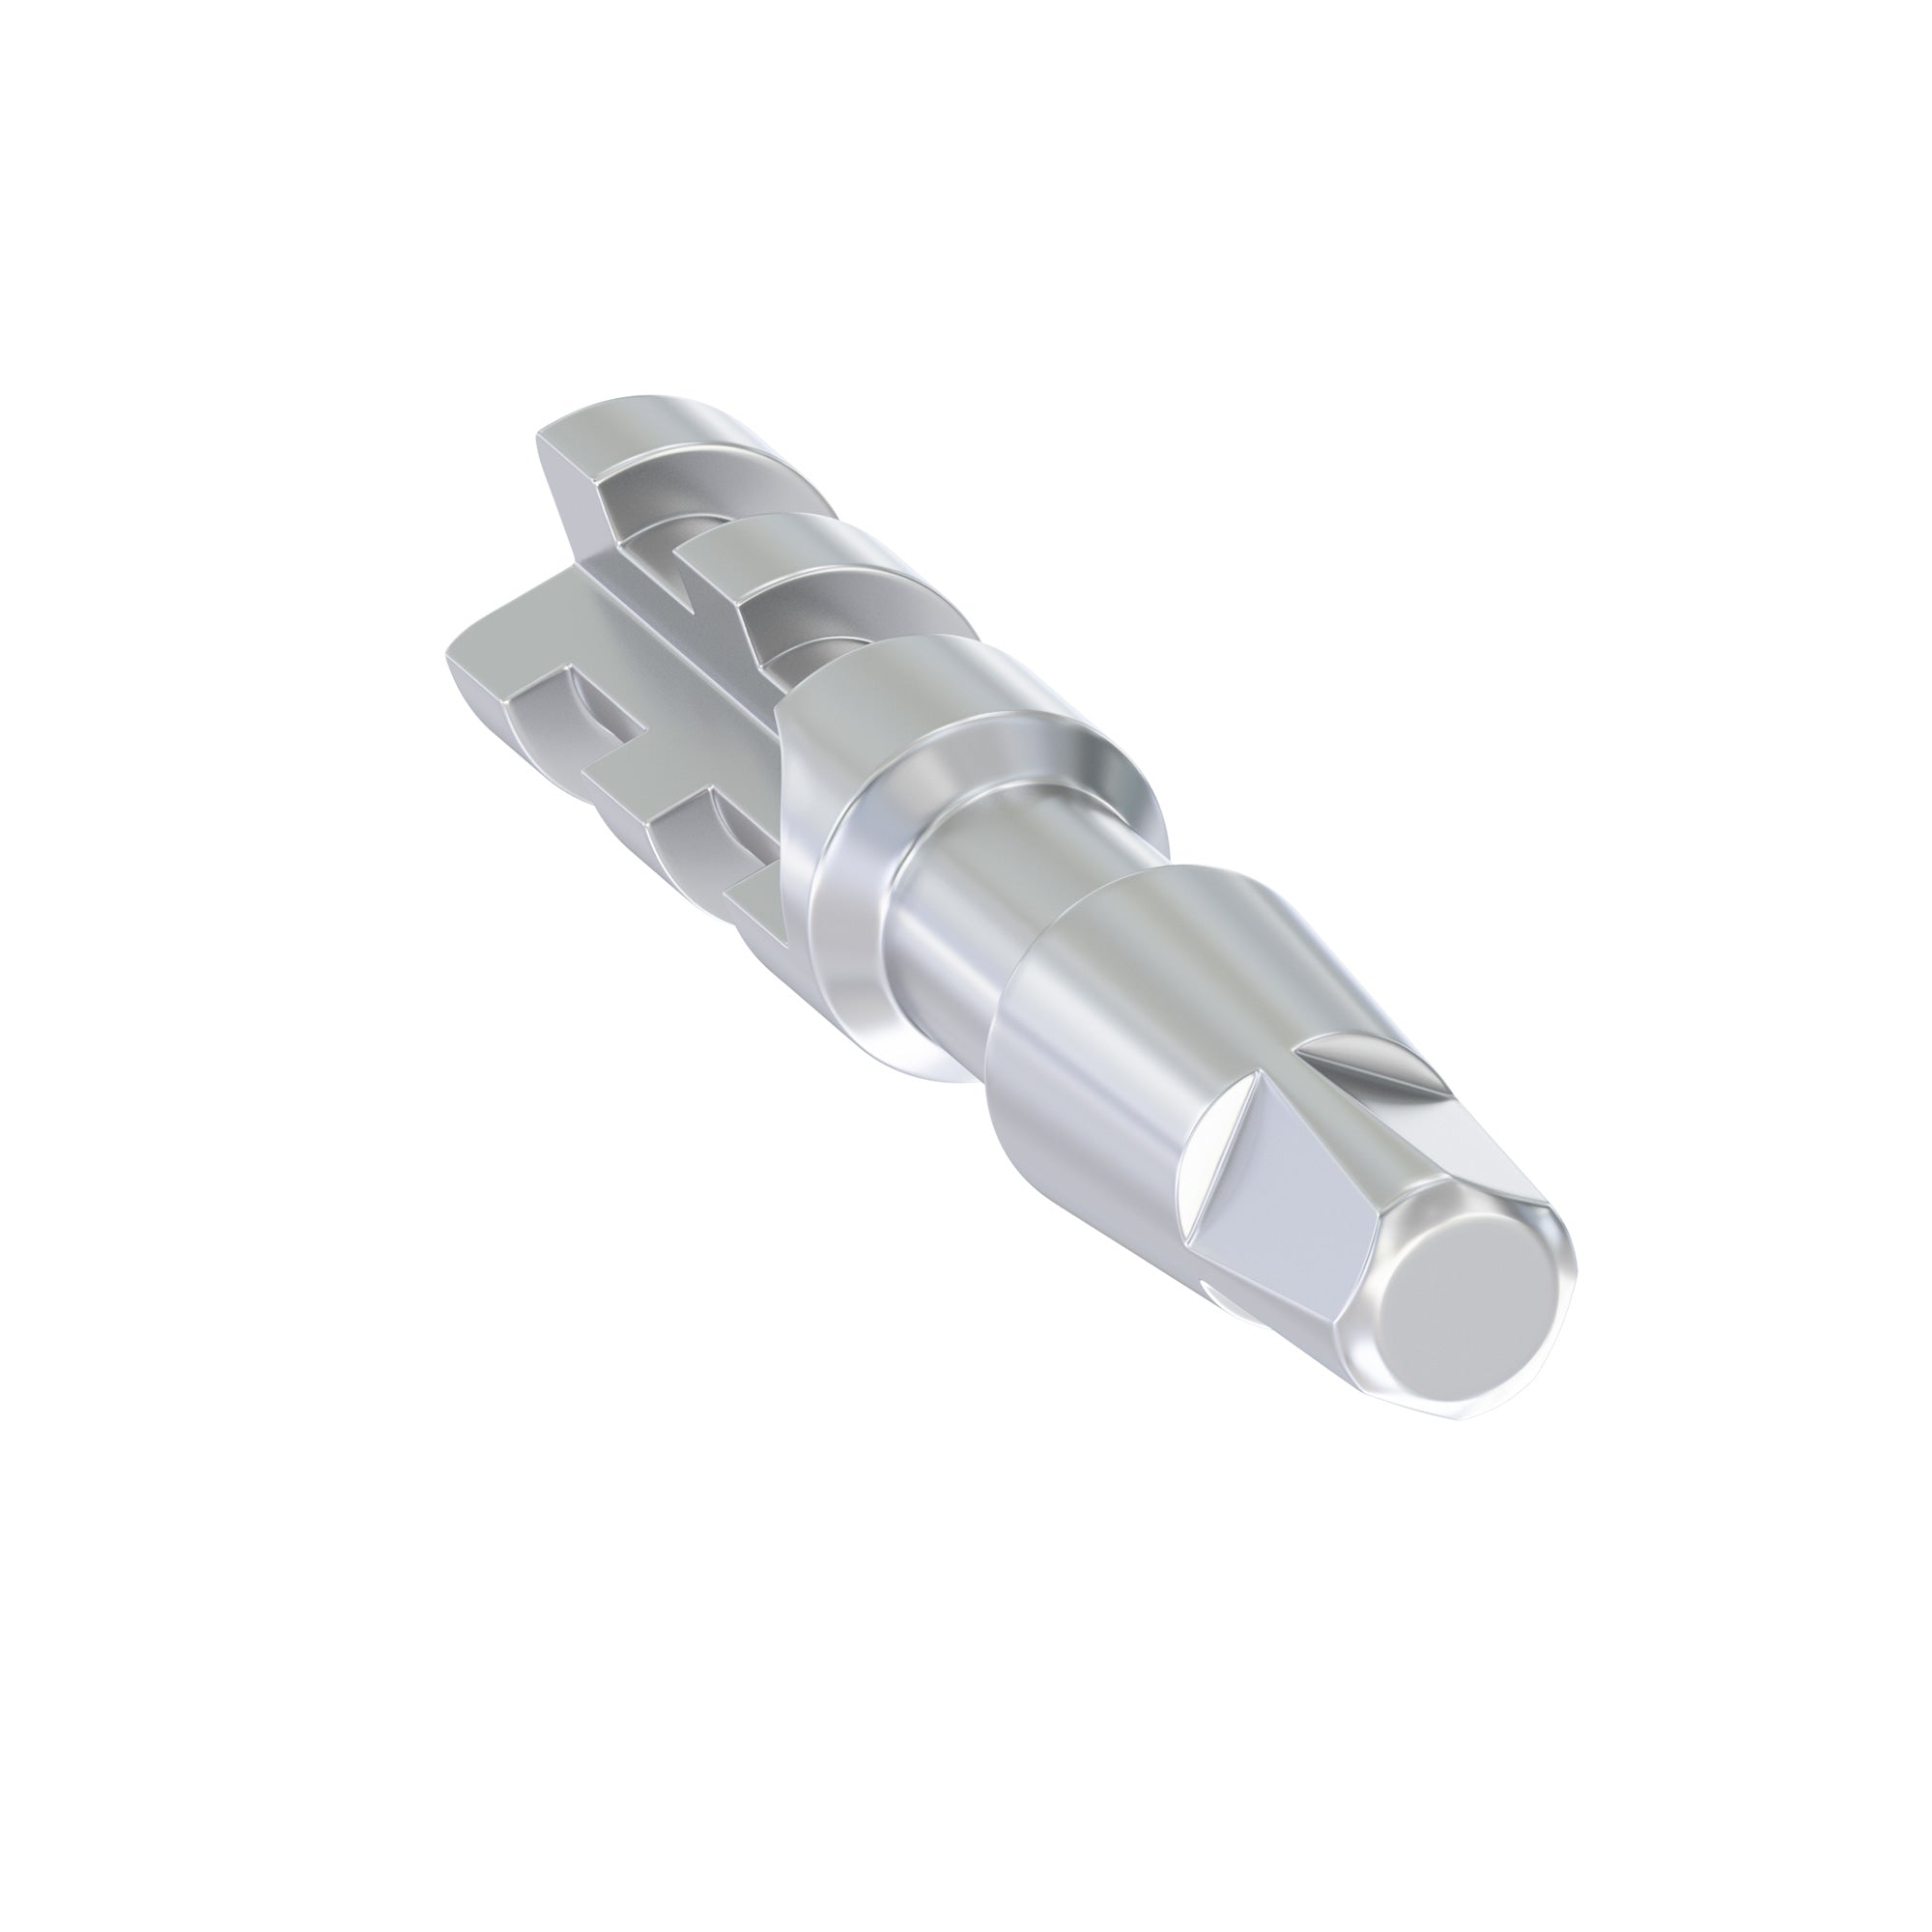 DSI Analog For One Piece Compressive Implant